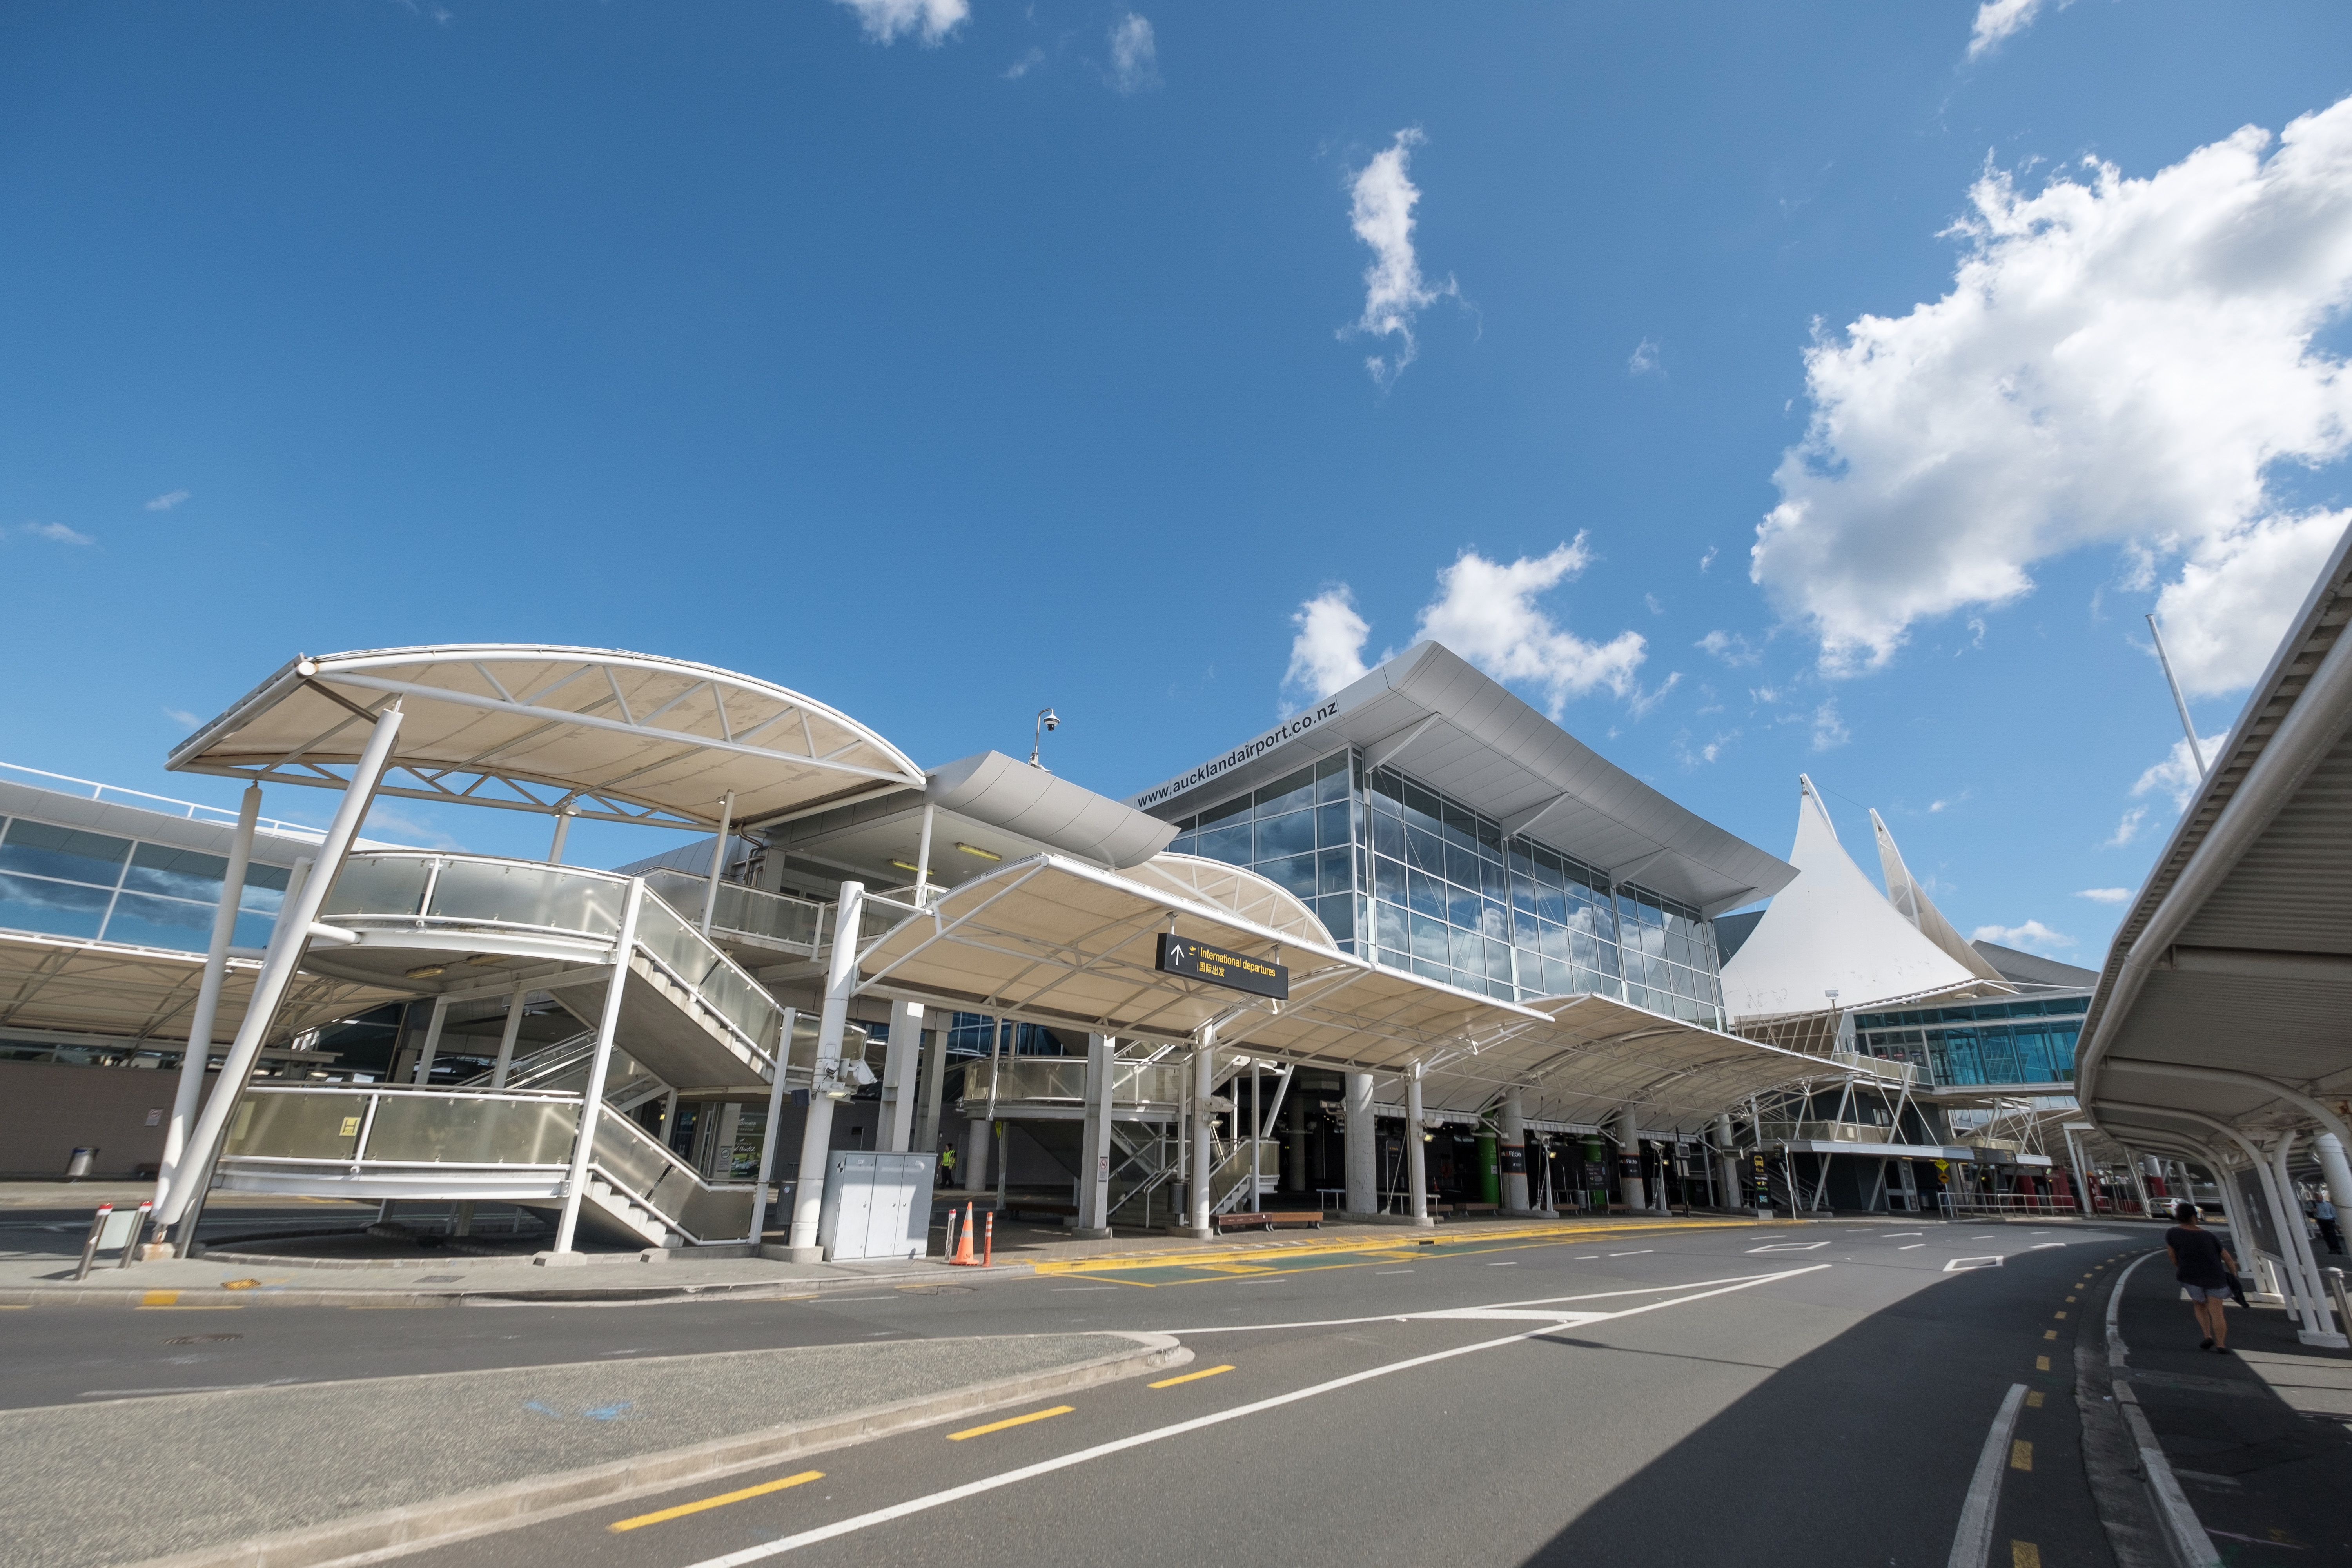 Auckland Airport is the largest airport in the country with the largest baggage screening